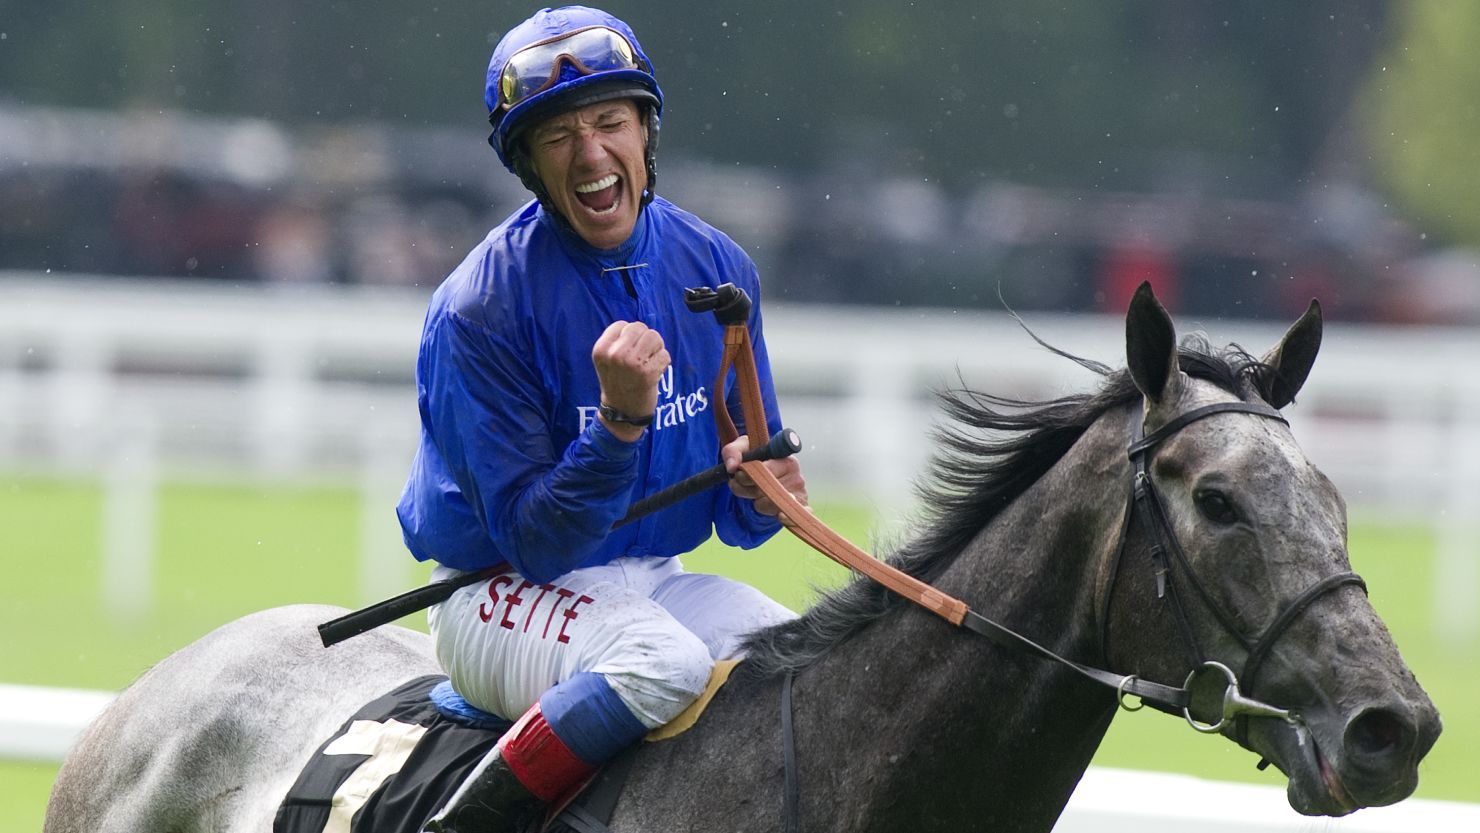 Frankie Dettori's decision to switch rides from Opinion Poll to Colour Vision proved a wise one.